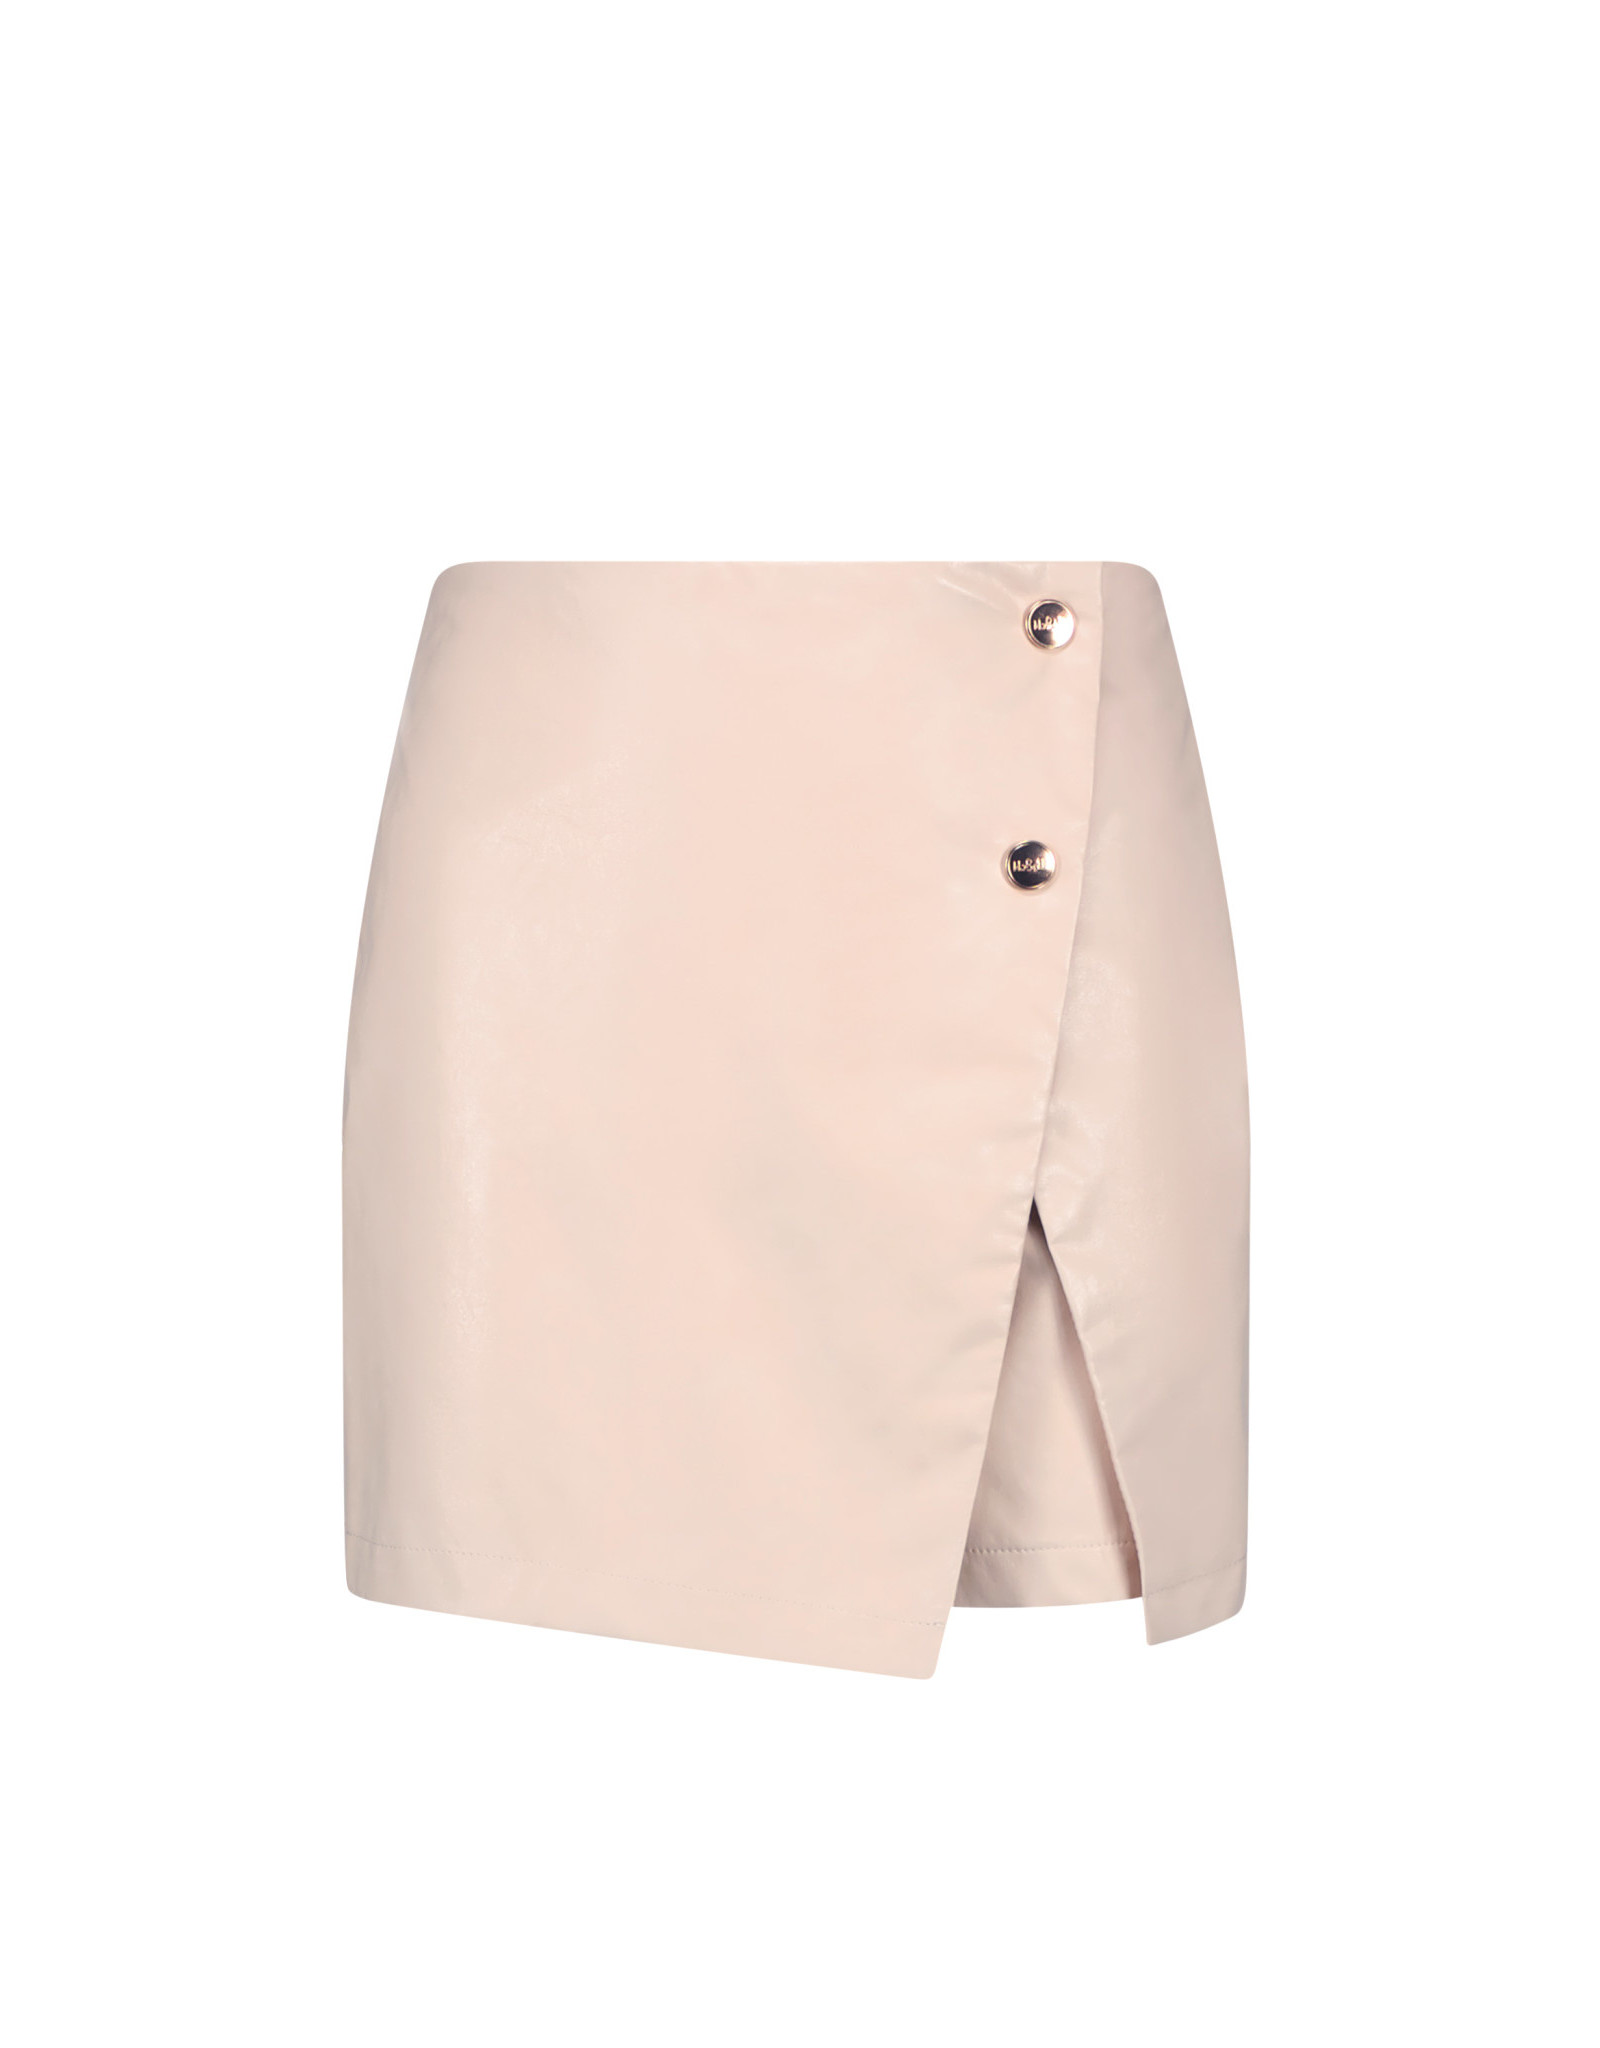 Nobell Sinda fake leather short with flap at front Rosy Sand